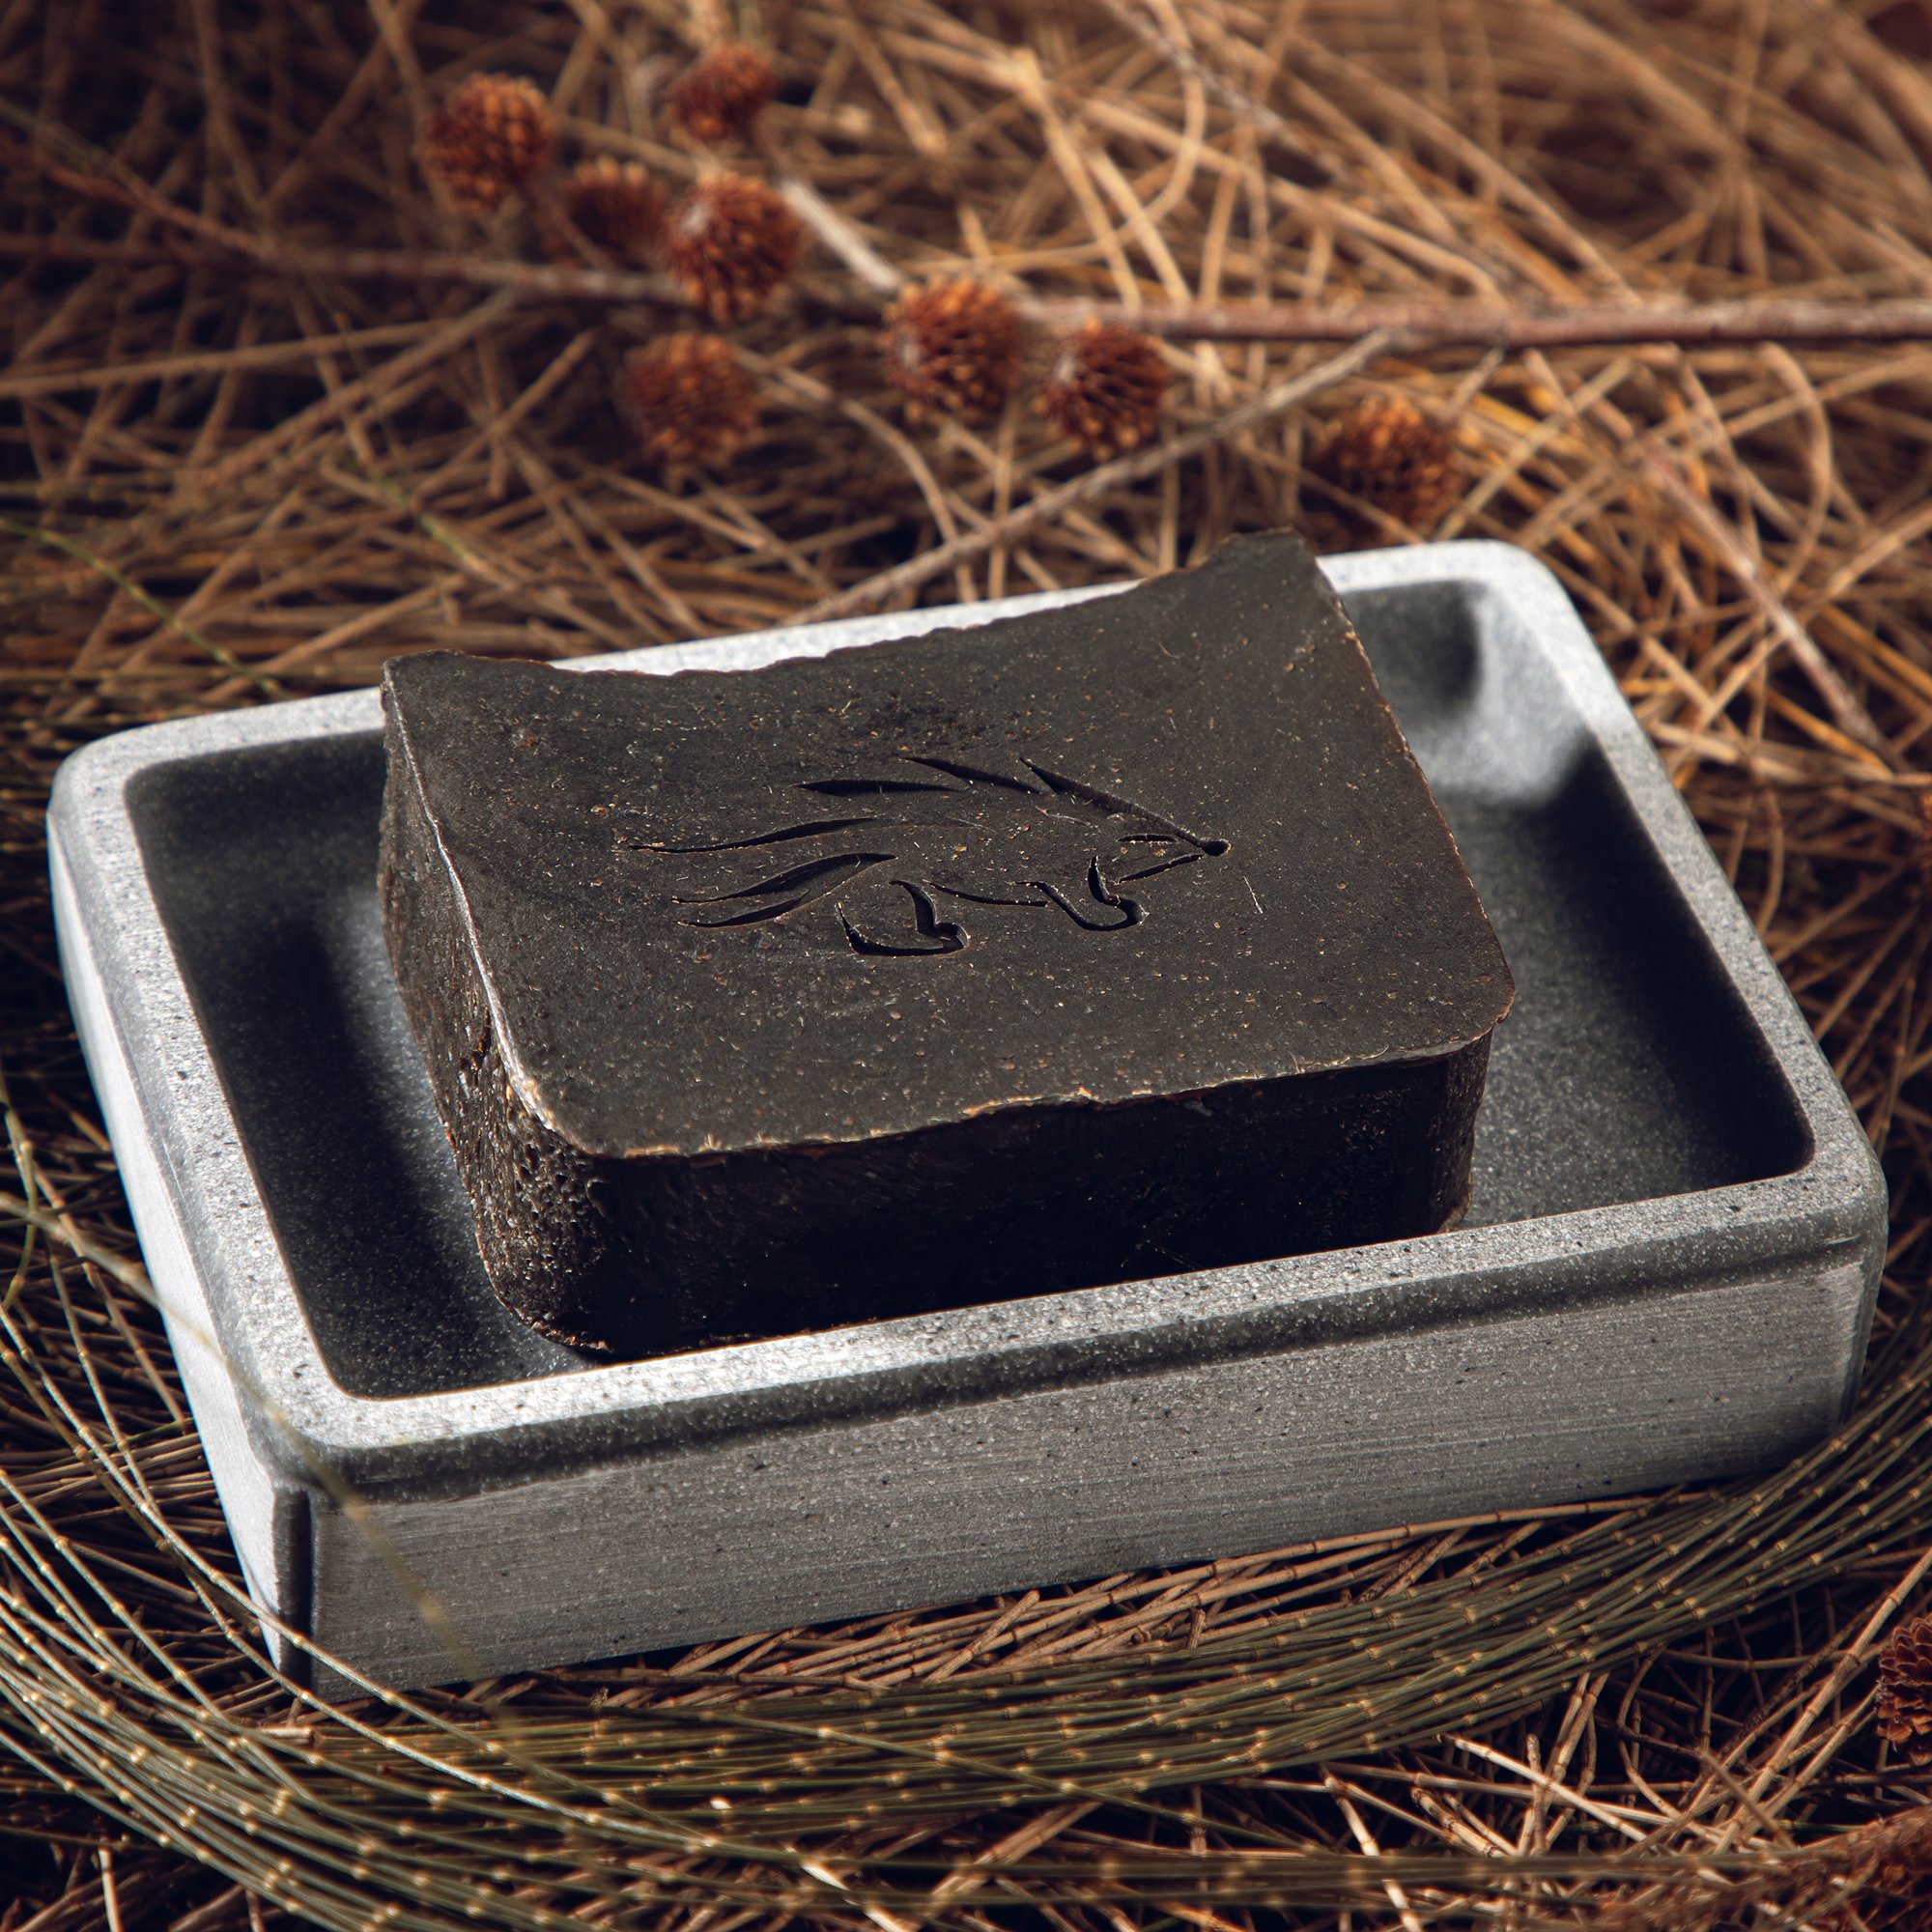 What is Pine Tar, and why do we use it in our soaps?